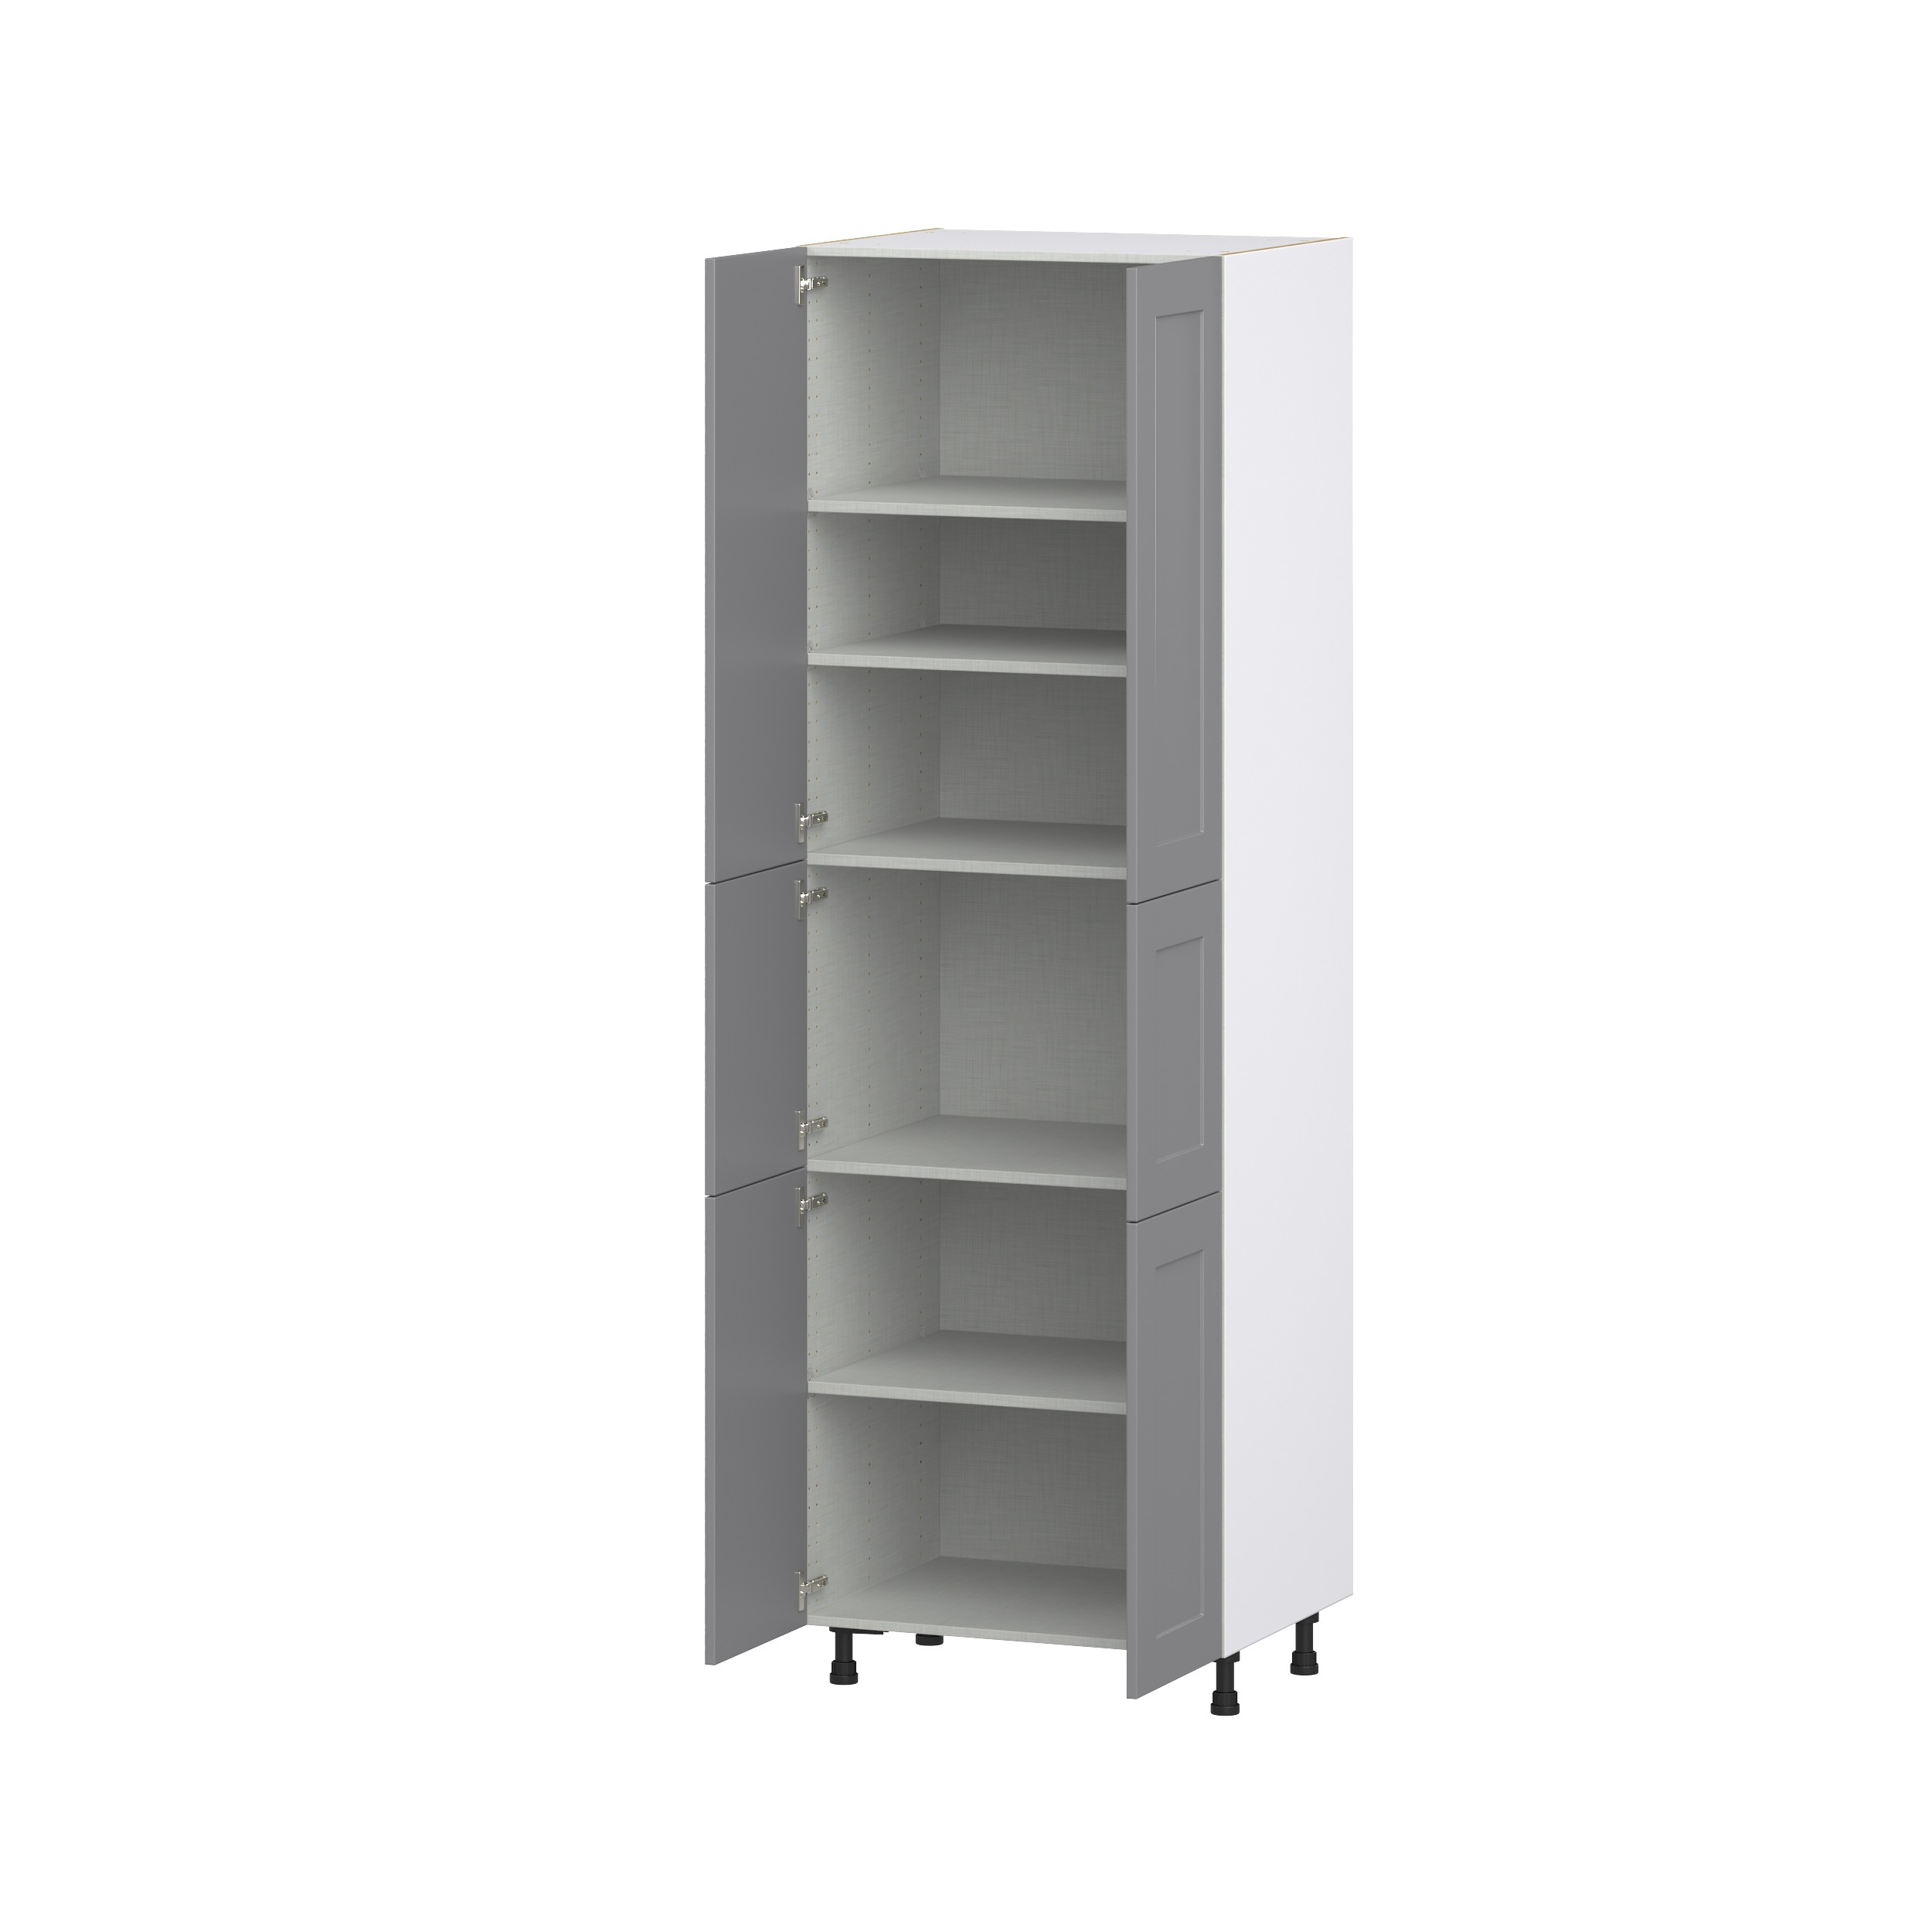 Willow Painted Slate Gray Shaker Assembled Pantry Cabinet with 5 Shelves (30 in. W x 94.5 in. H x 24 in. D)